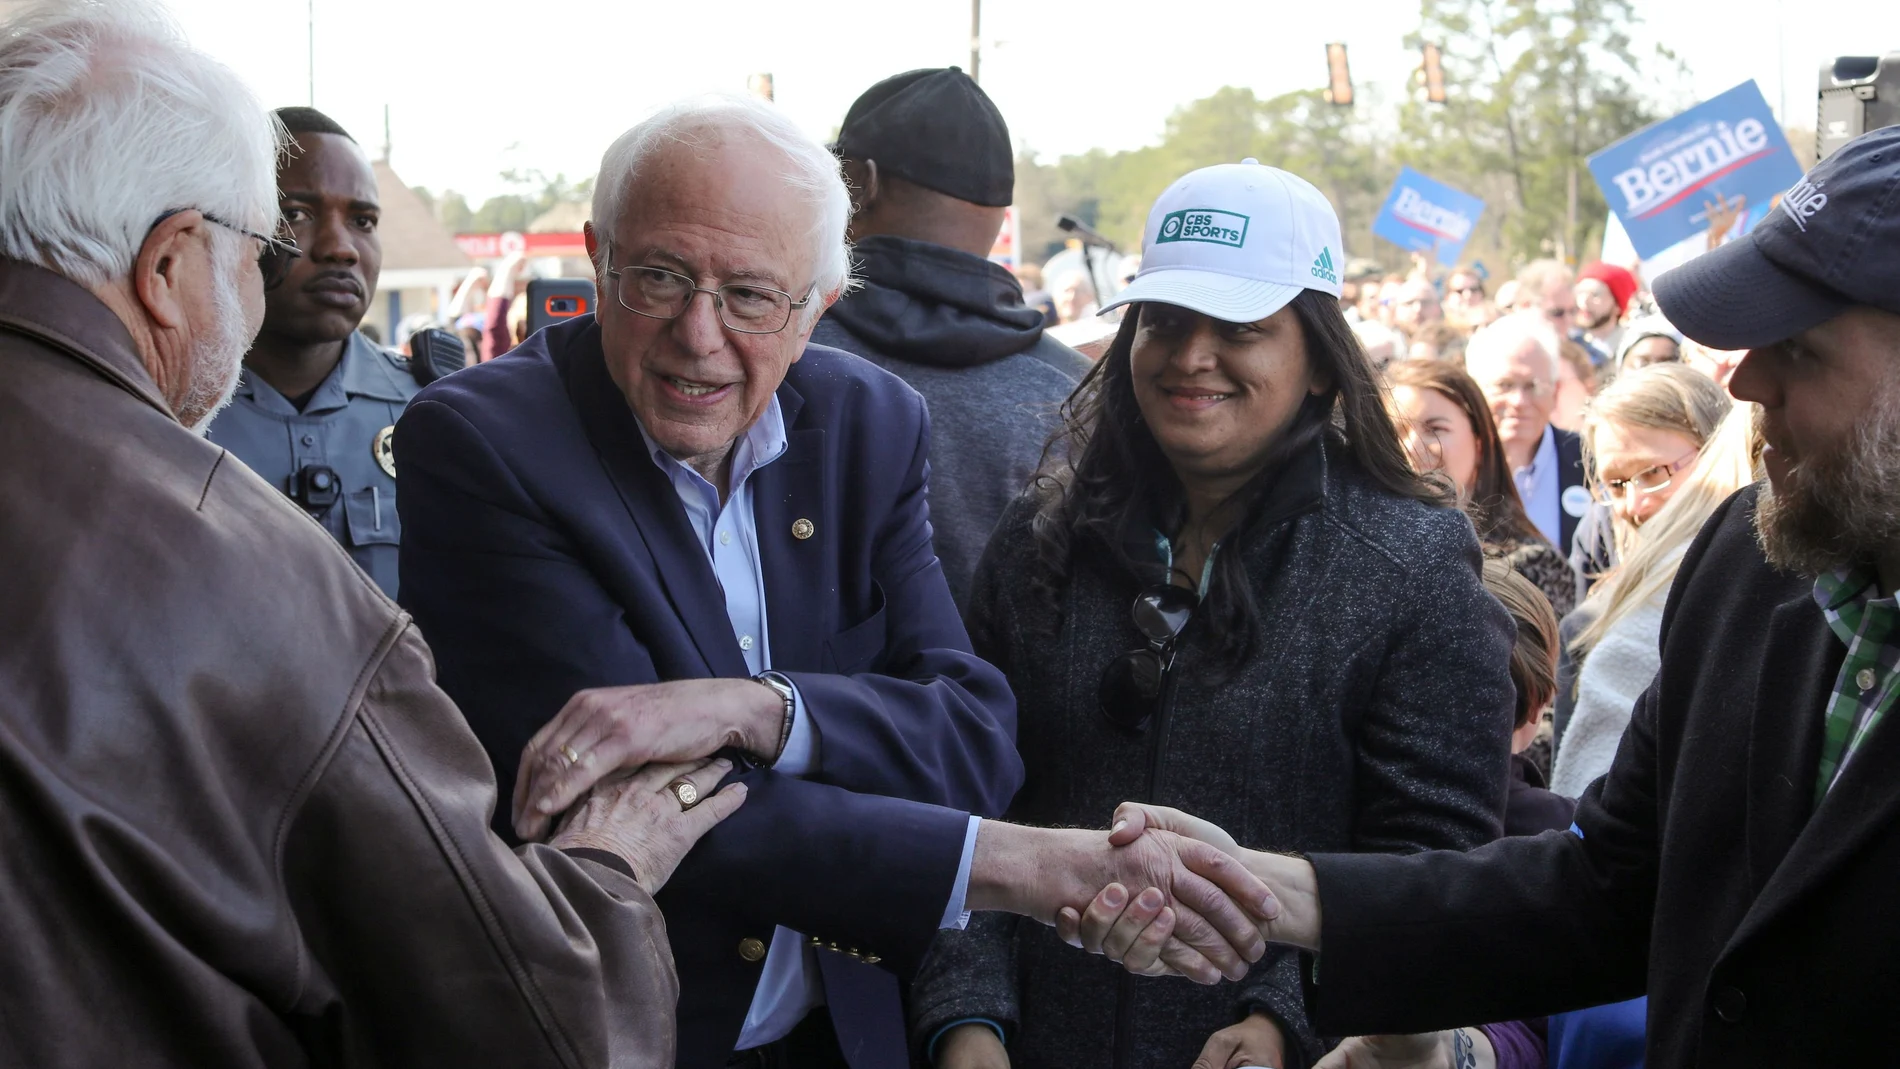 Democratic 2020 U.S. presidential candidate Sanders departs after rallying supporters at a campaign office in Aiken, South Carolina